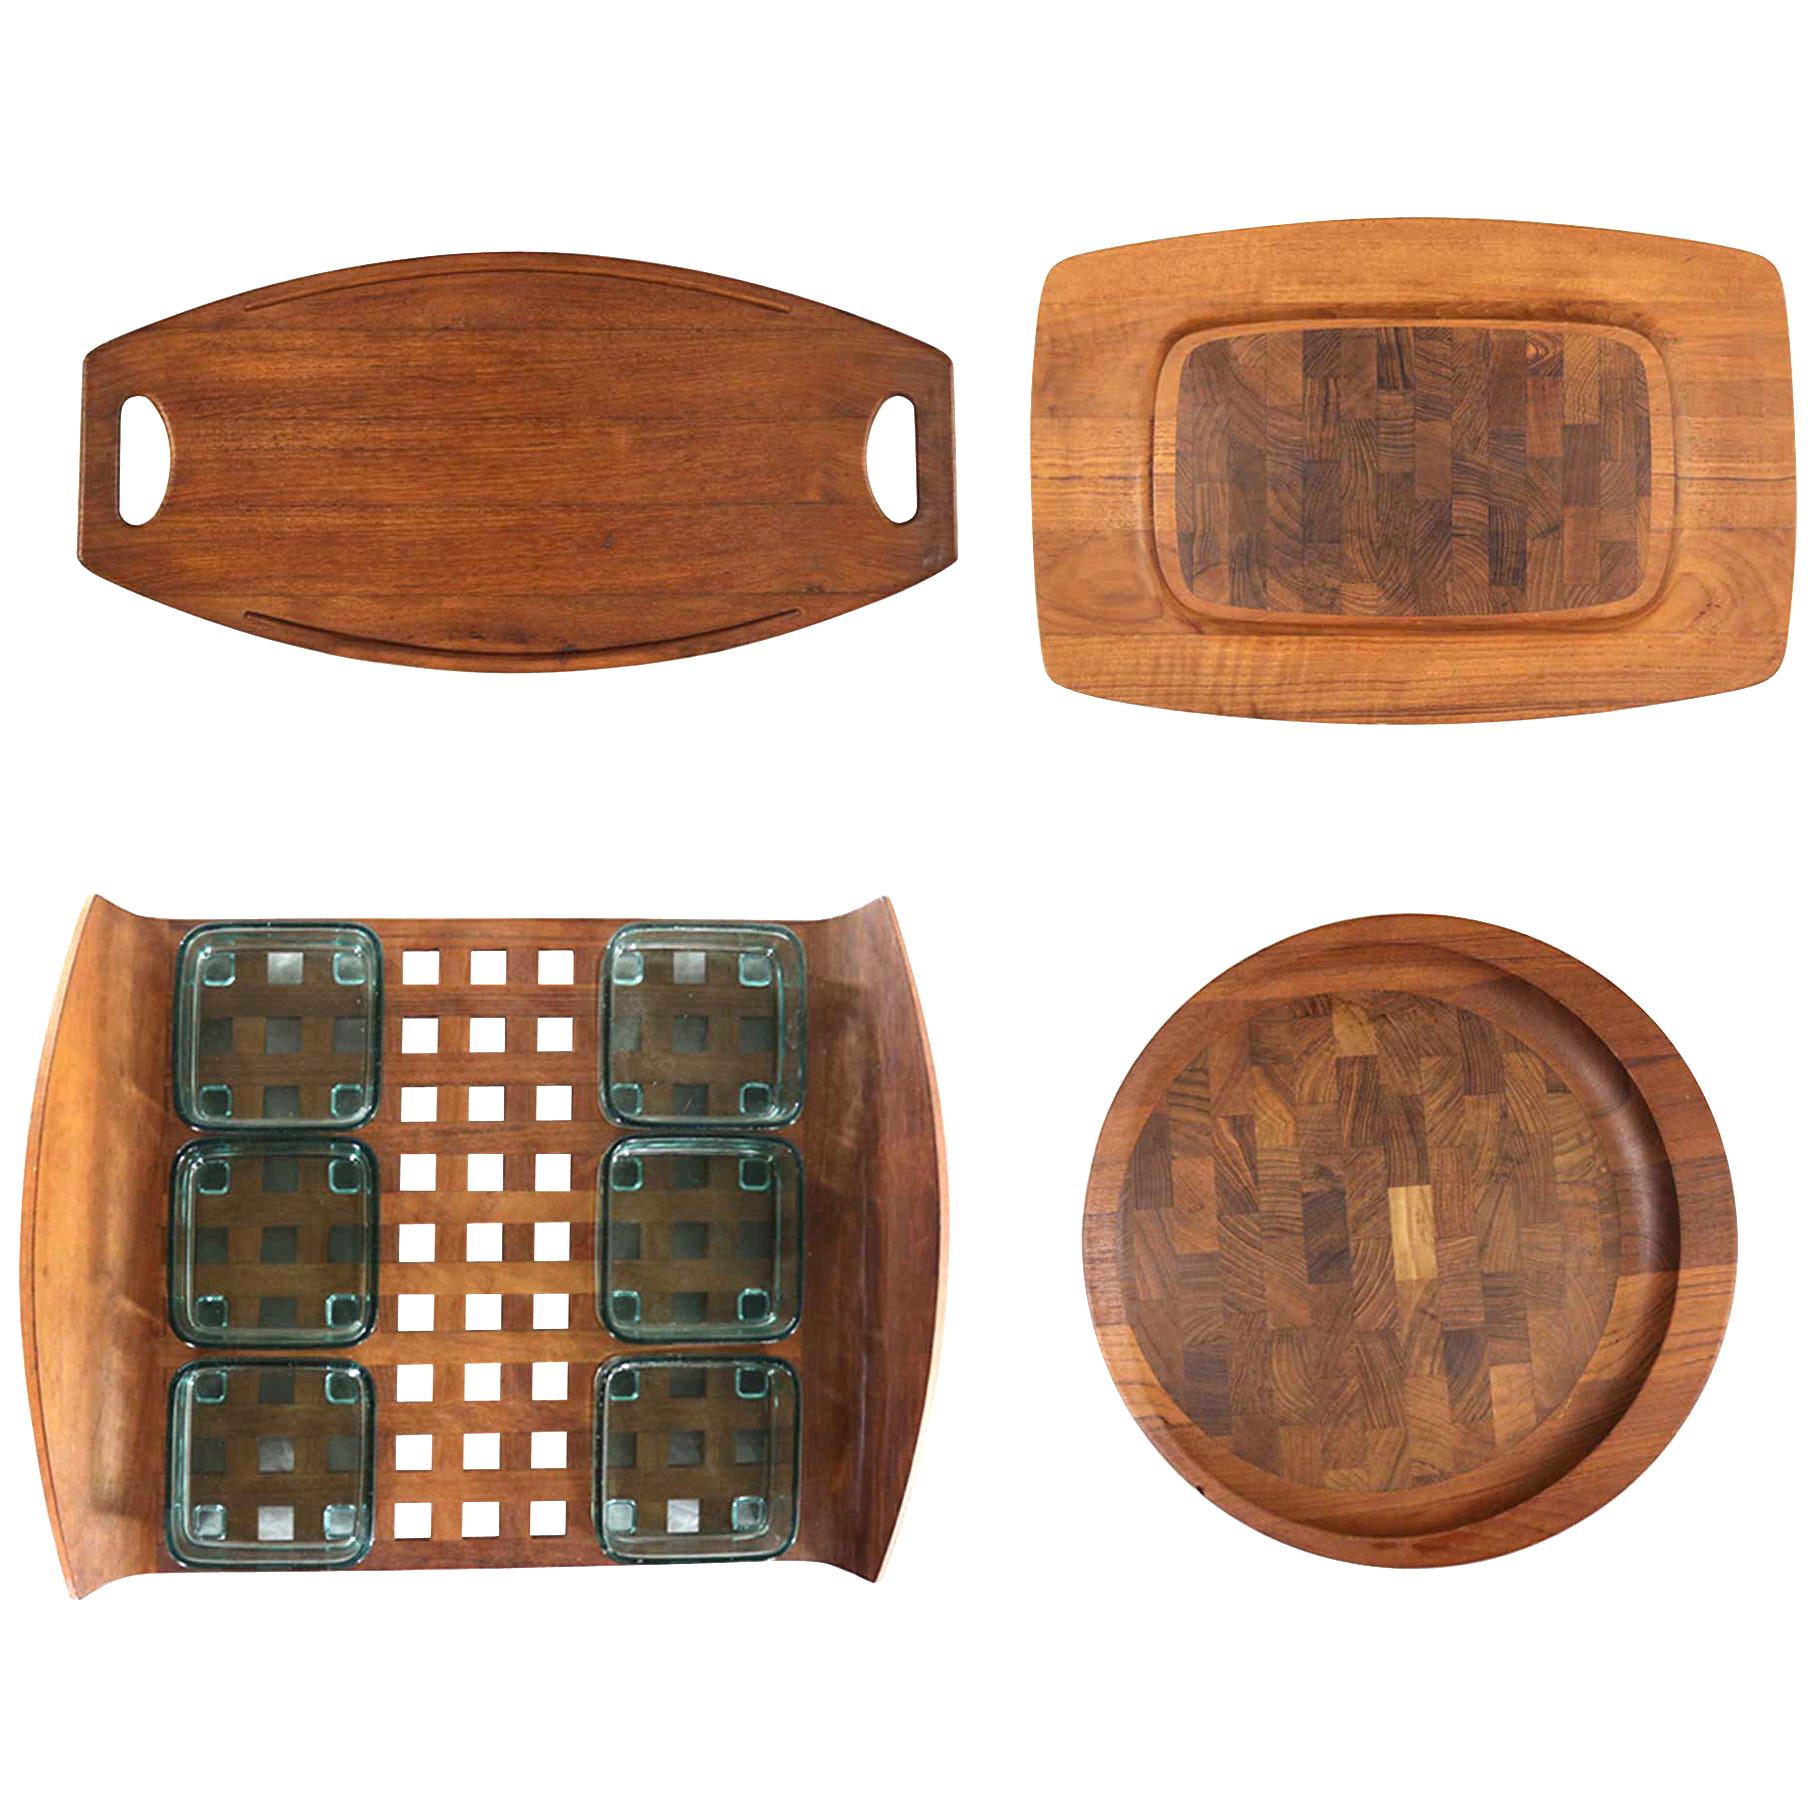 Selection of Dansk Designs Teak Trays or Cutting Boards by Jens Quistgaard